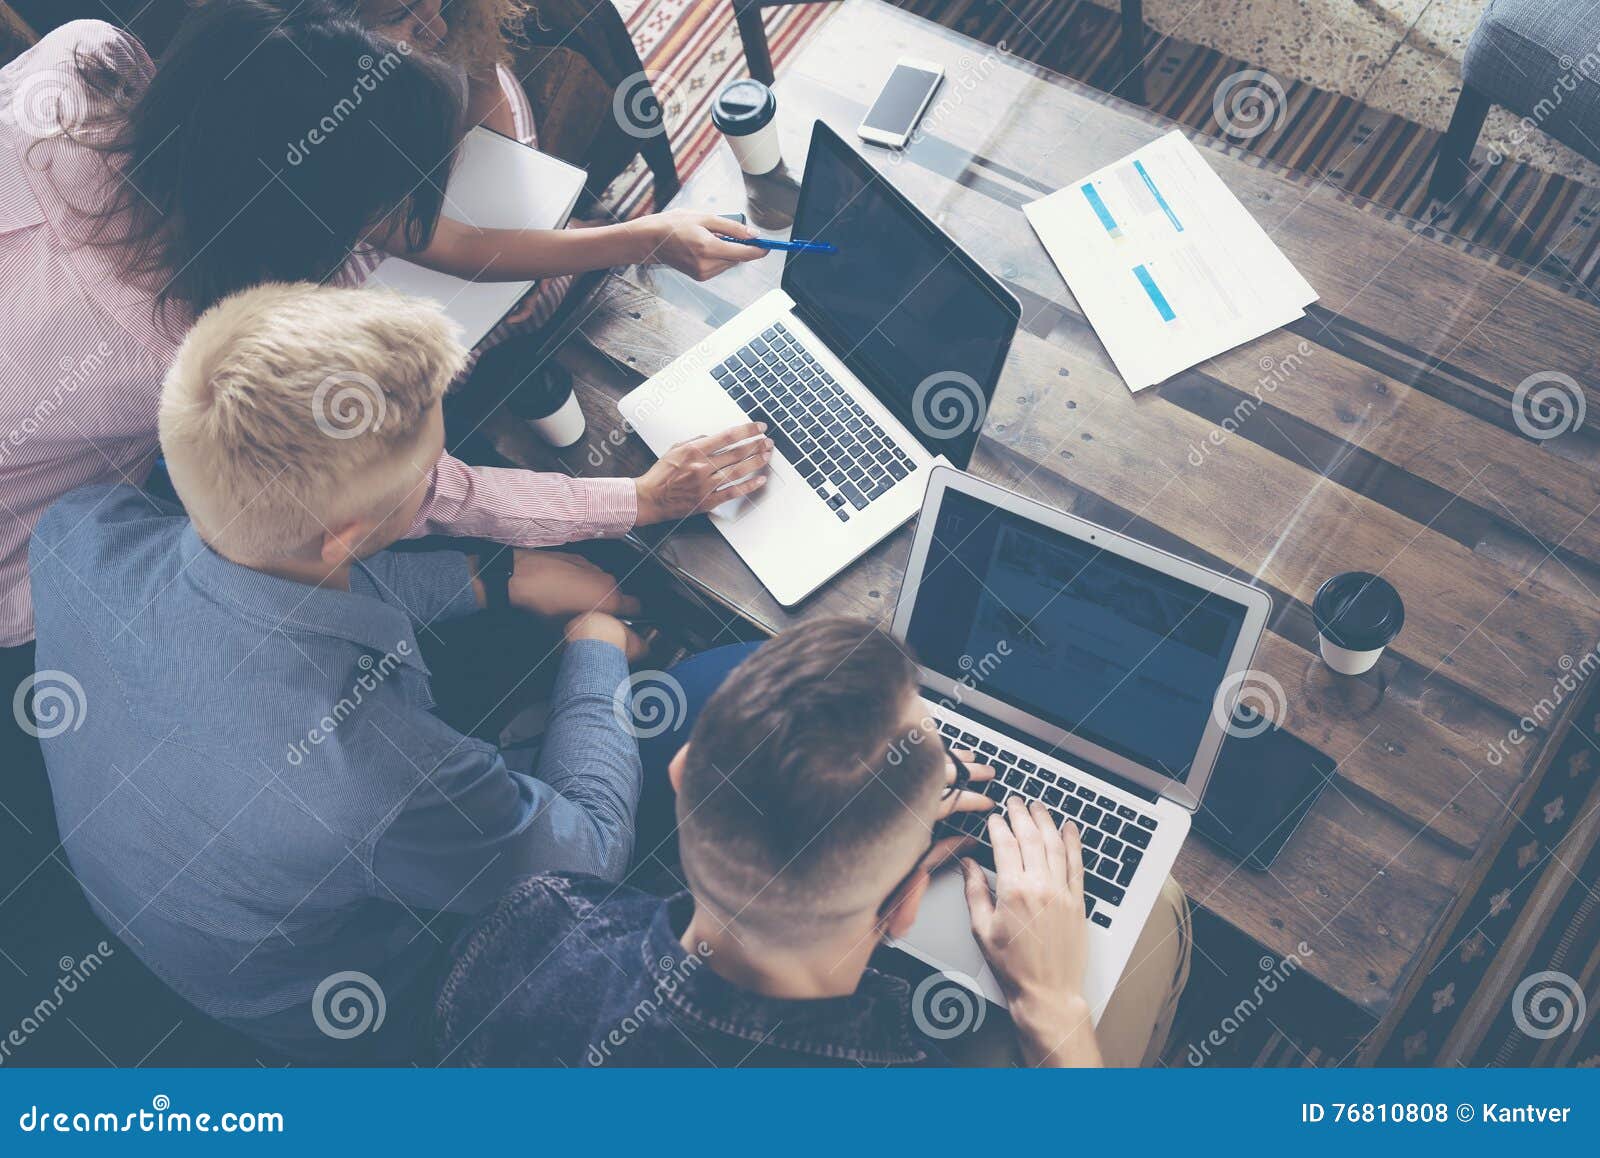 group young coworkers team making excellent business decisions.creative people discussion corporate work concept modern